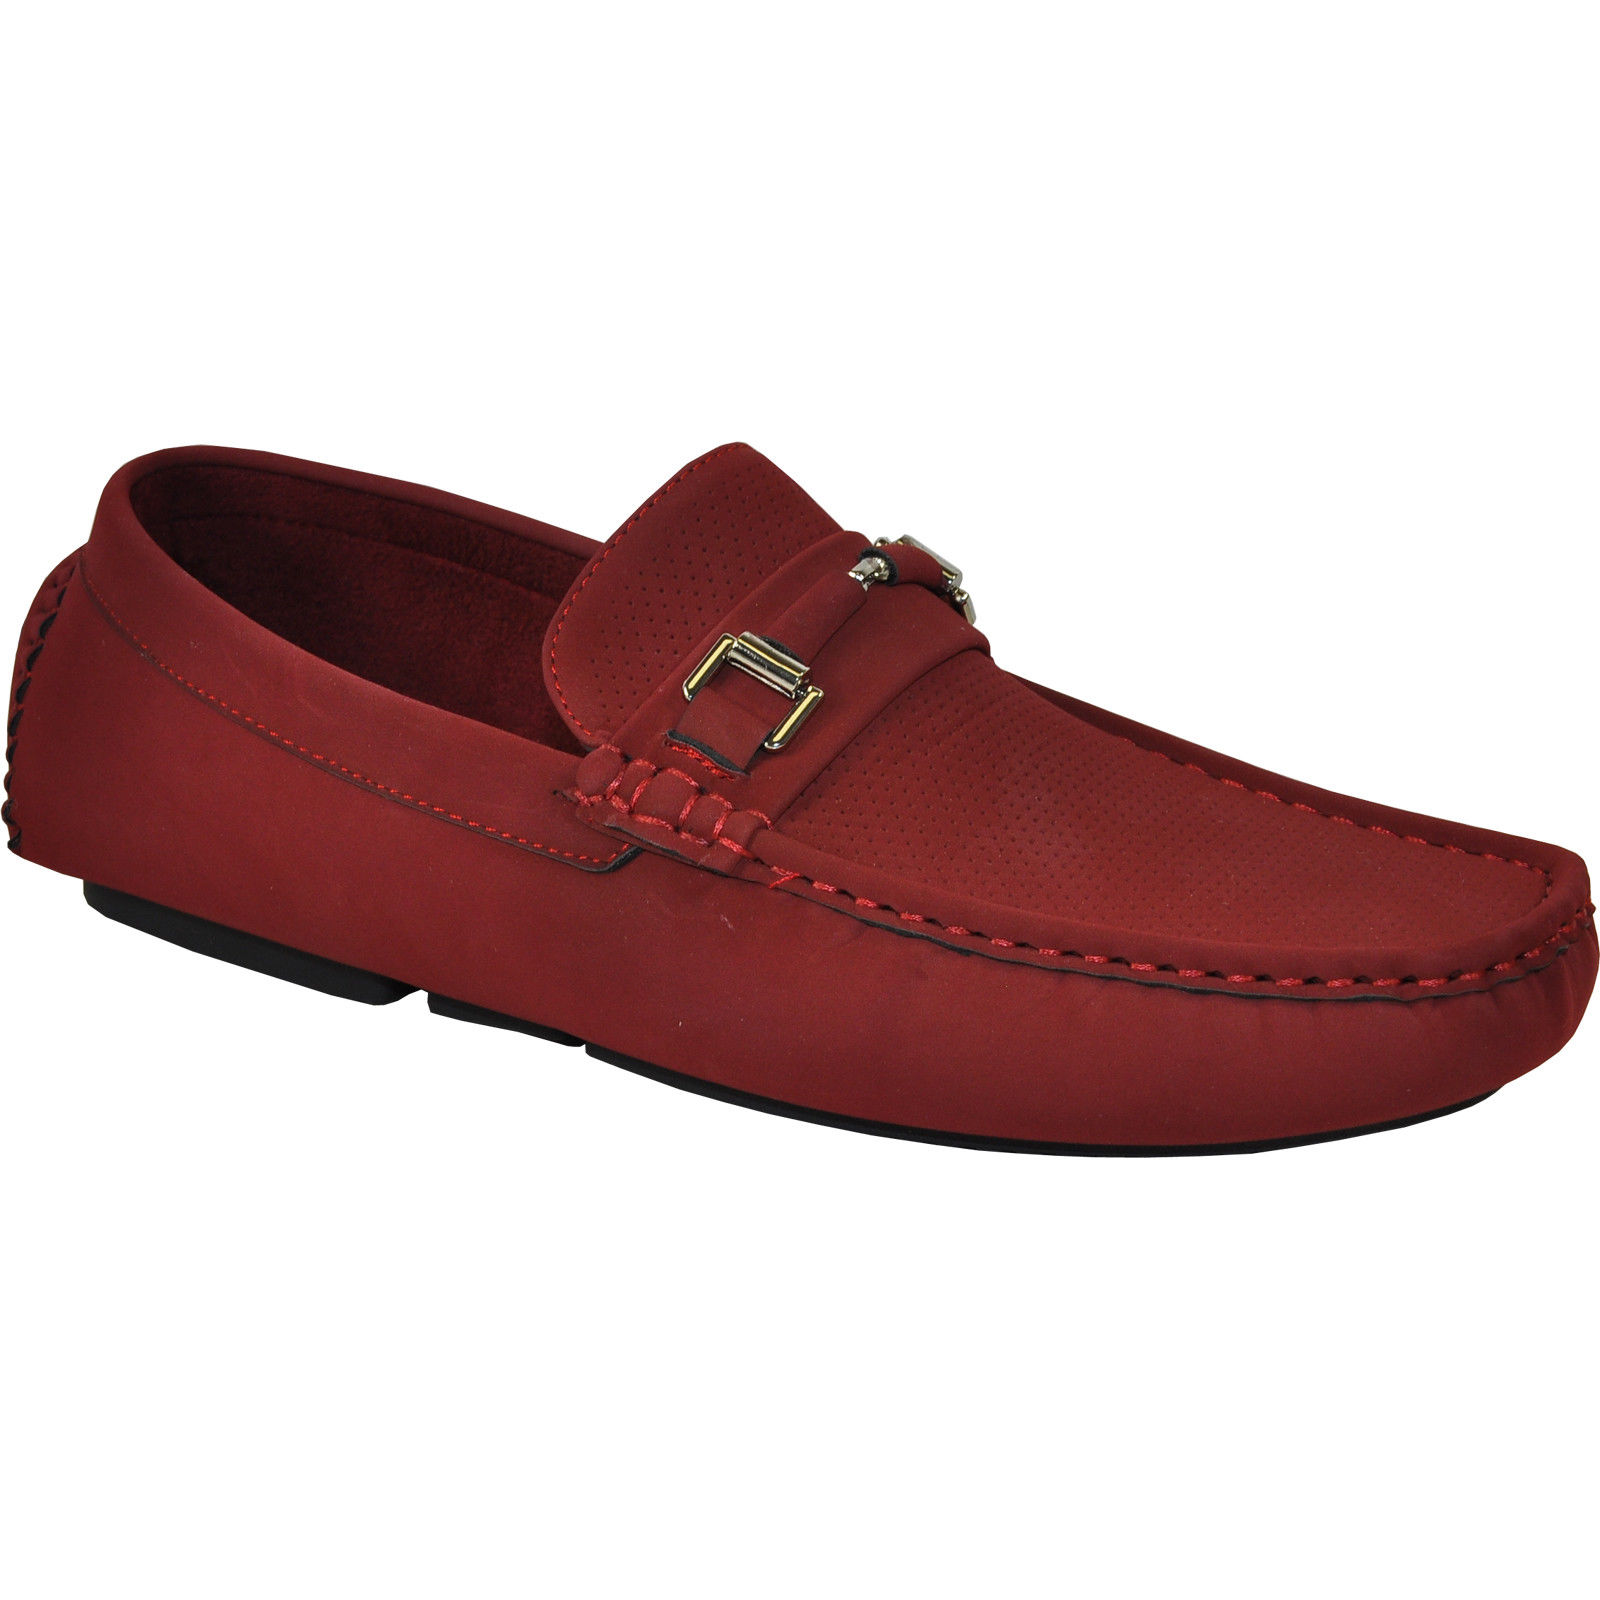 Bravo! Men Casual Shoe Todd-1 Driving Moccasin Red 14M US - image 1 of 7